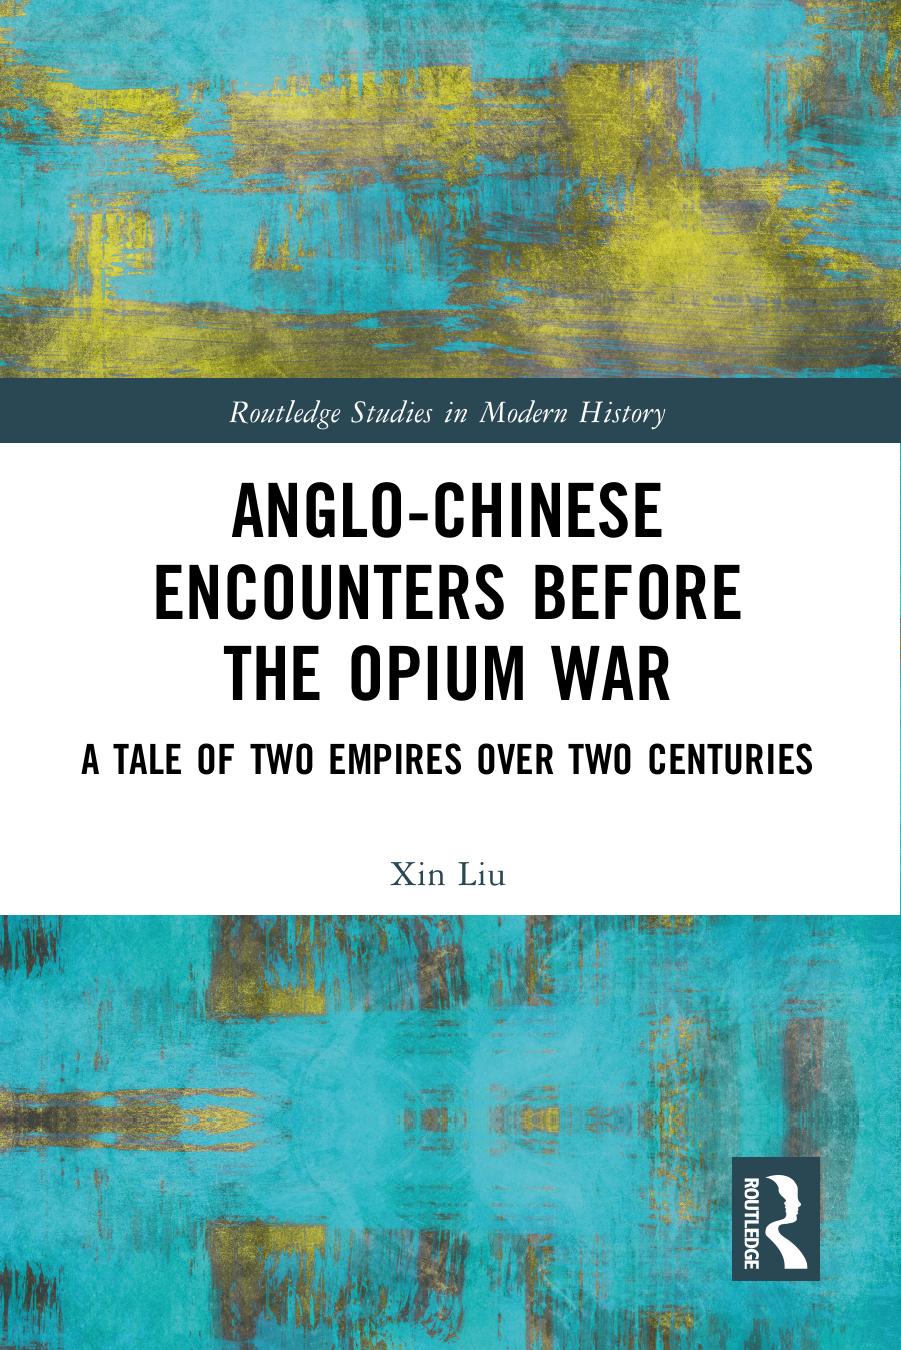 Anglo-Chinese Encounters Before the Opium War (Routledge Studies in Modern History) by Xin Liu